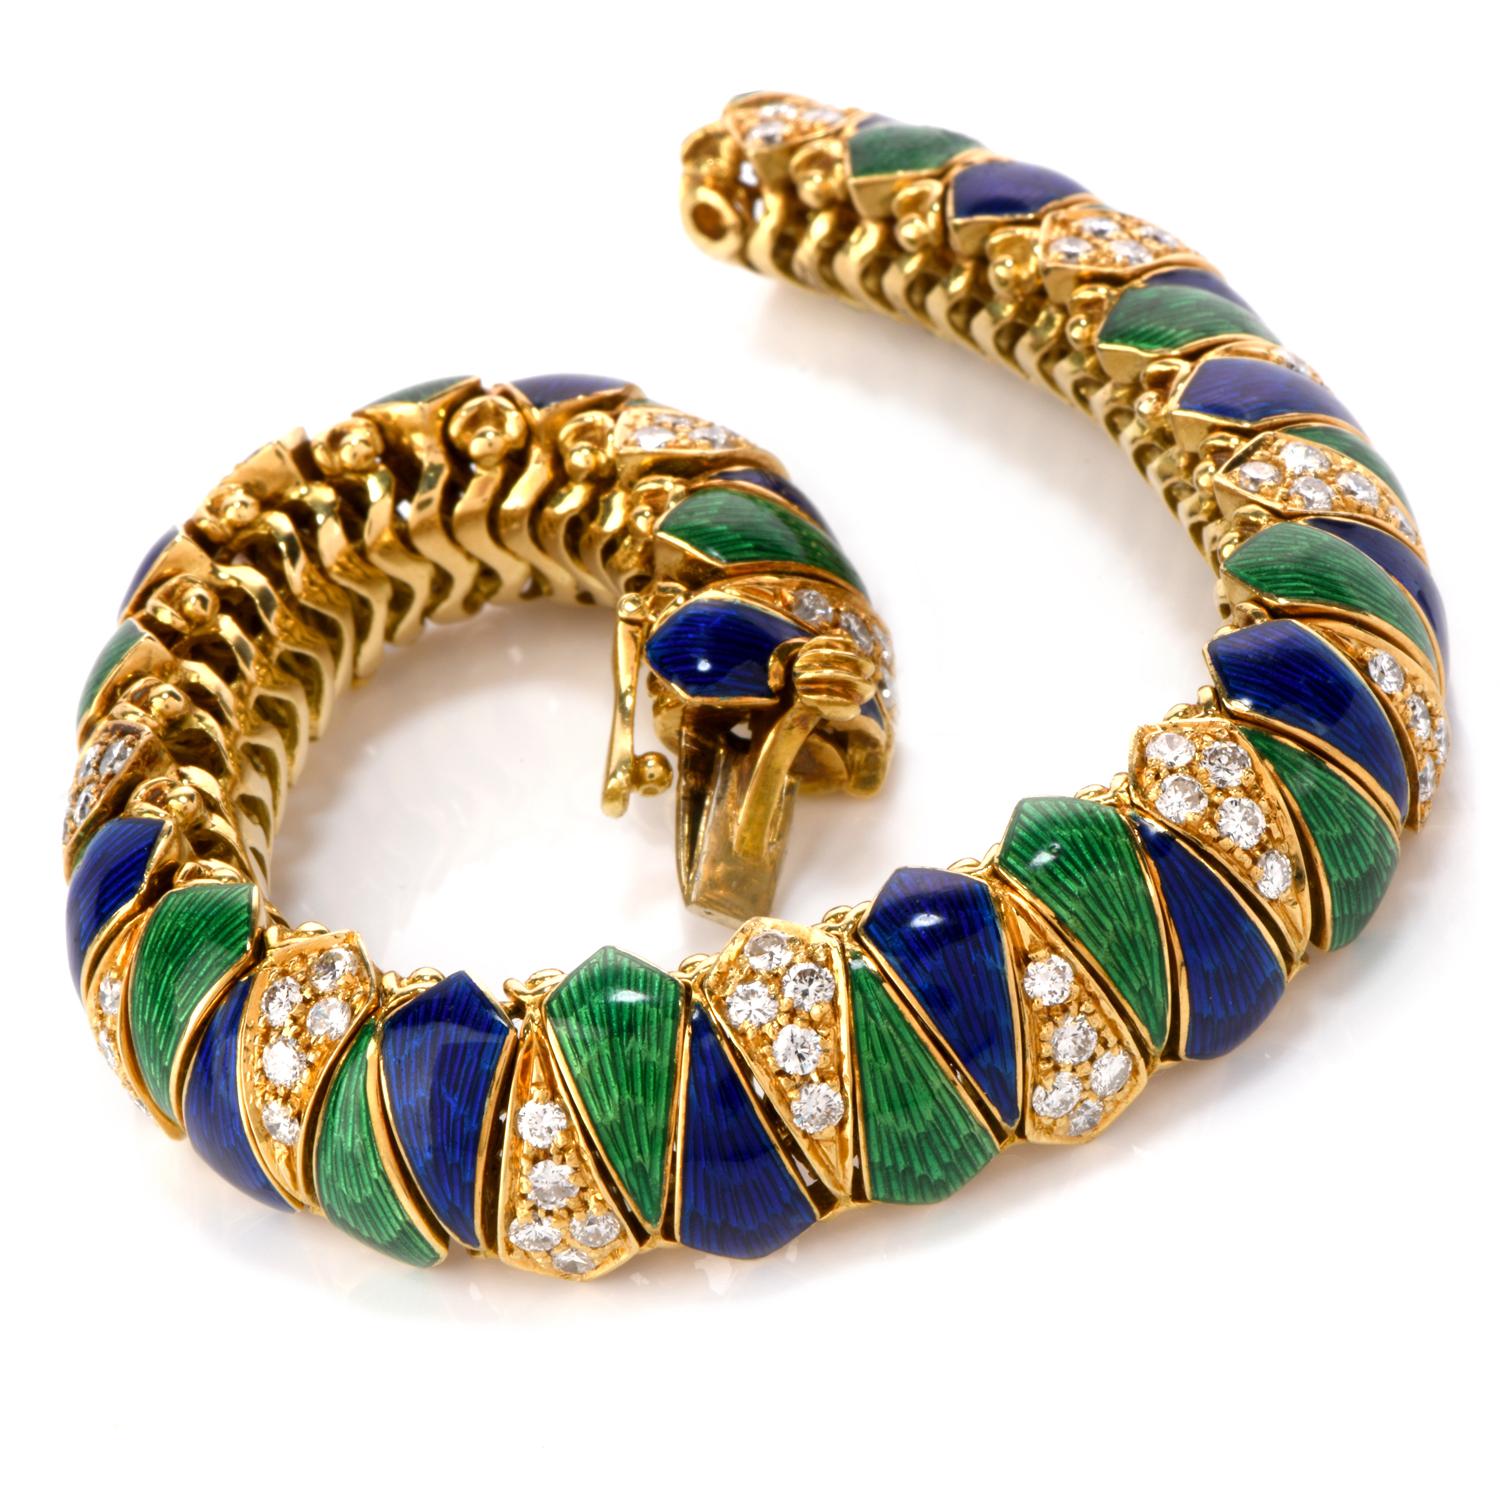 The rich bright cobalt blue and emerald green enamel hues along with the white shimmer of the diamonds in this alluring bracelet will be sure enhance your style!   This Vintage Diamond Blue & Green Enamel 18K Yellow Gold Bracelet weighs at an